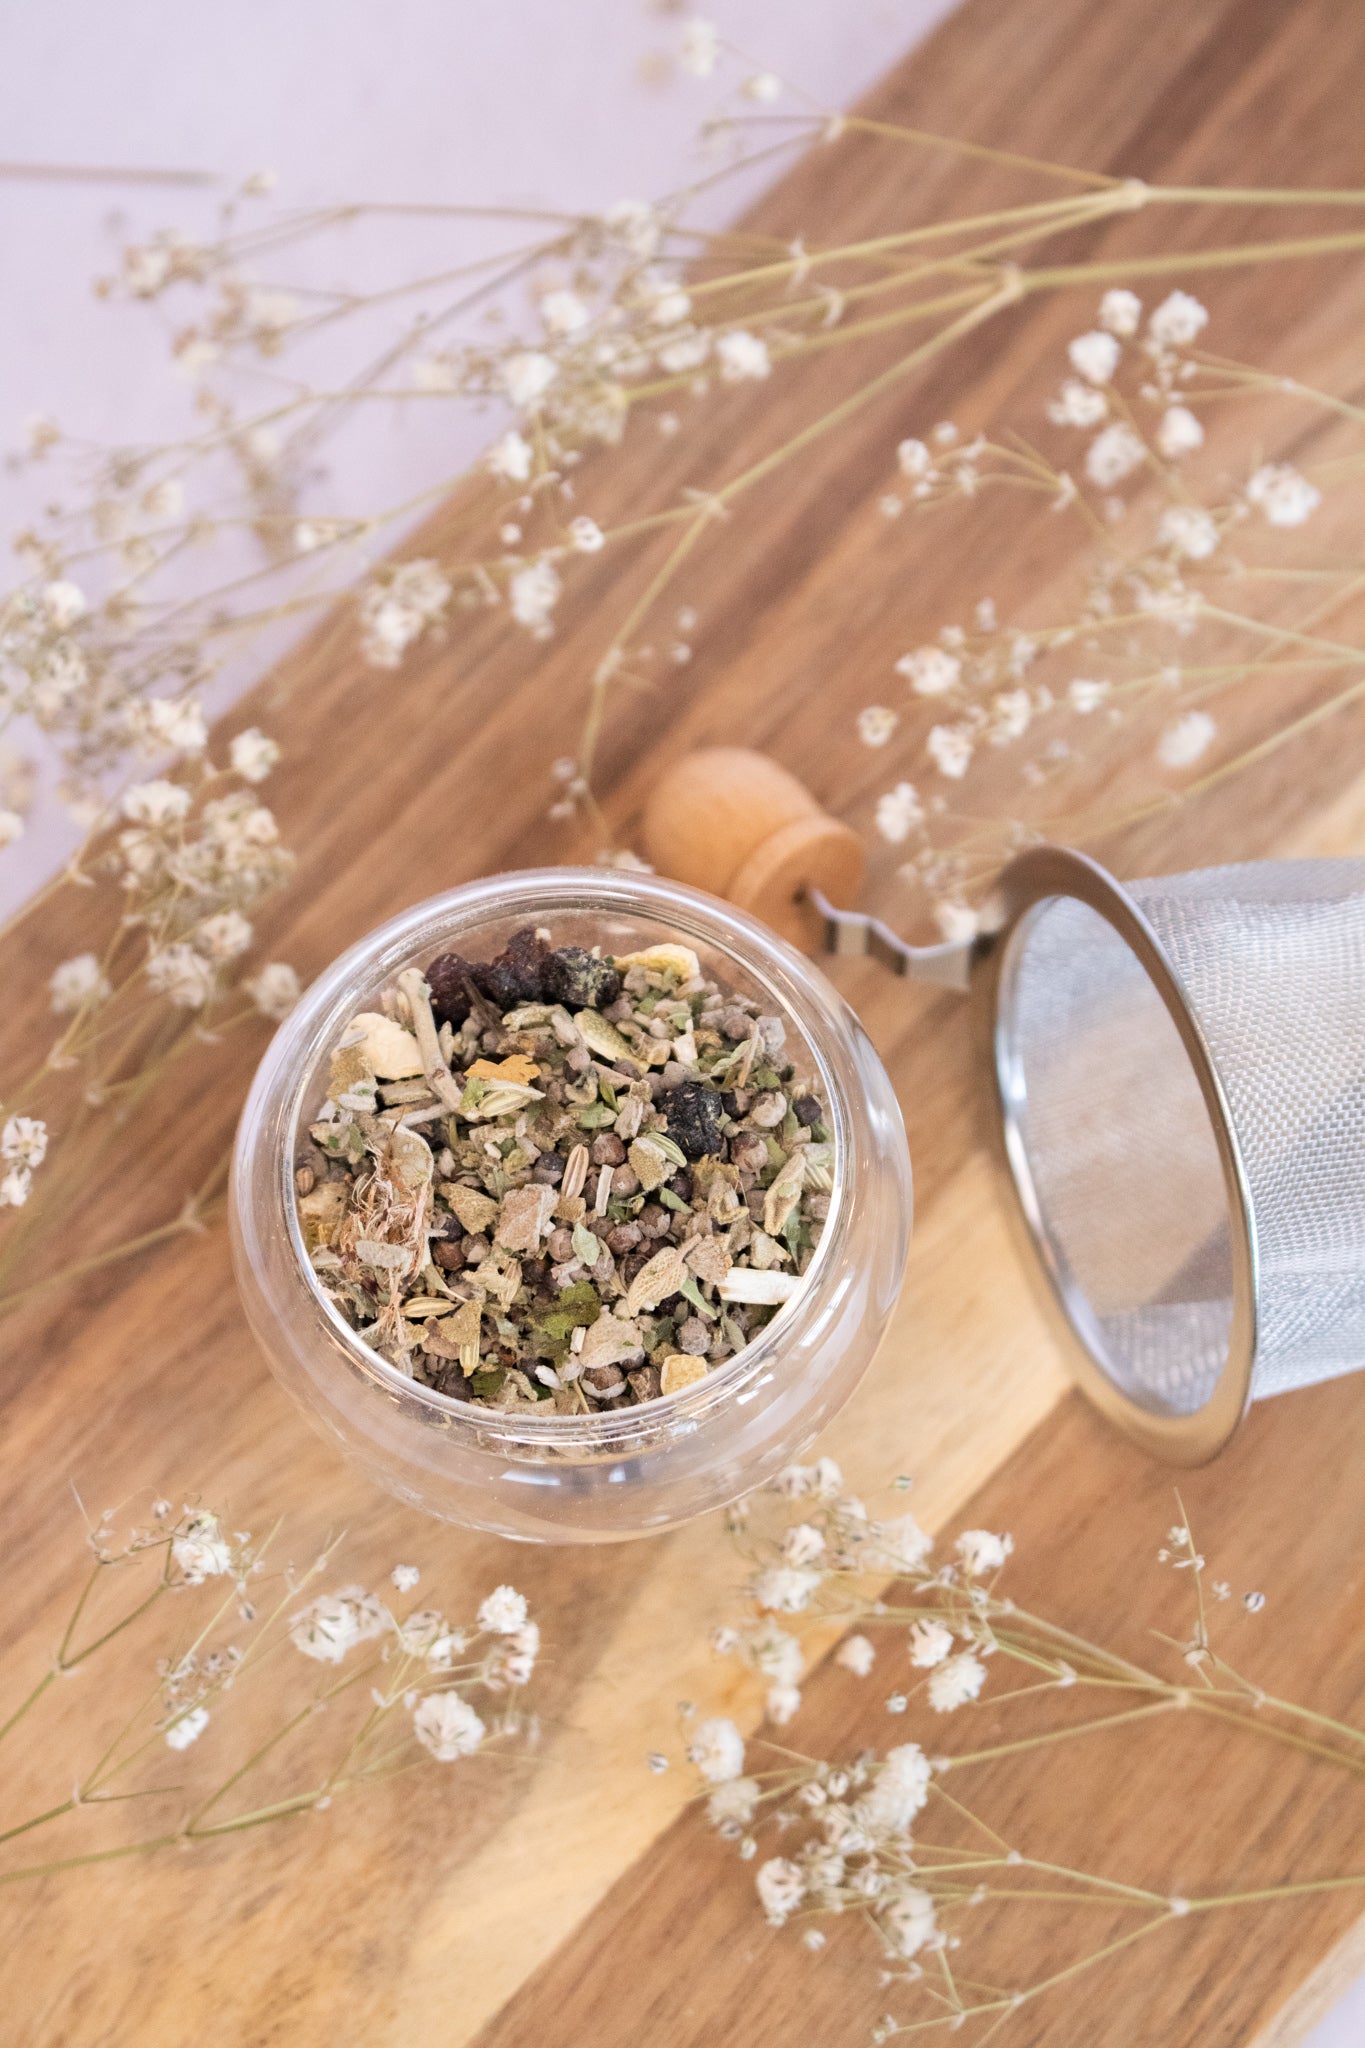 Our Moon Cycle herbal tea has been formulated with a blend of herbs known for their ability to support hormone balance, balance the menstrual cycle and ease symptoms of PMS.  